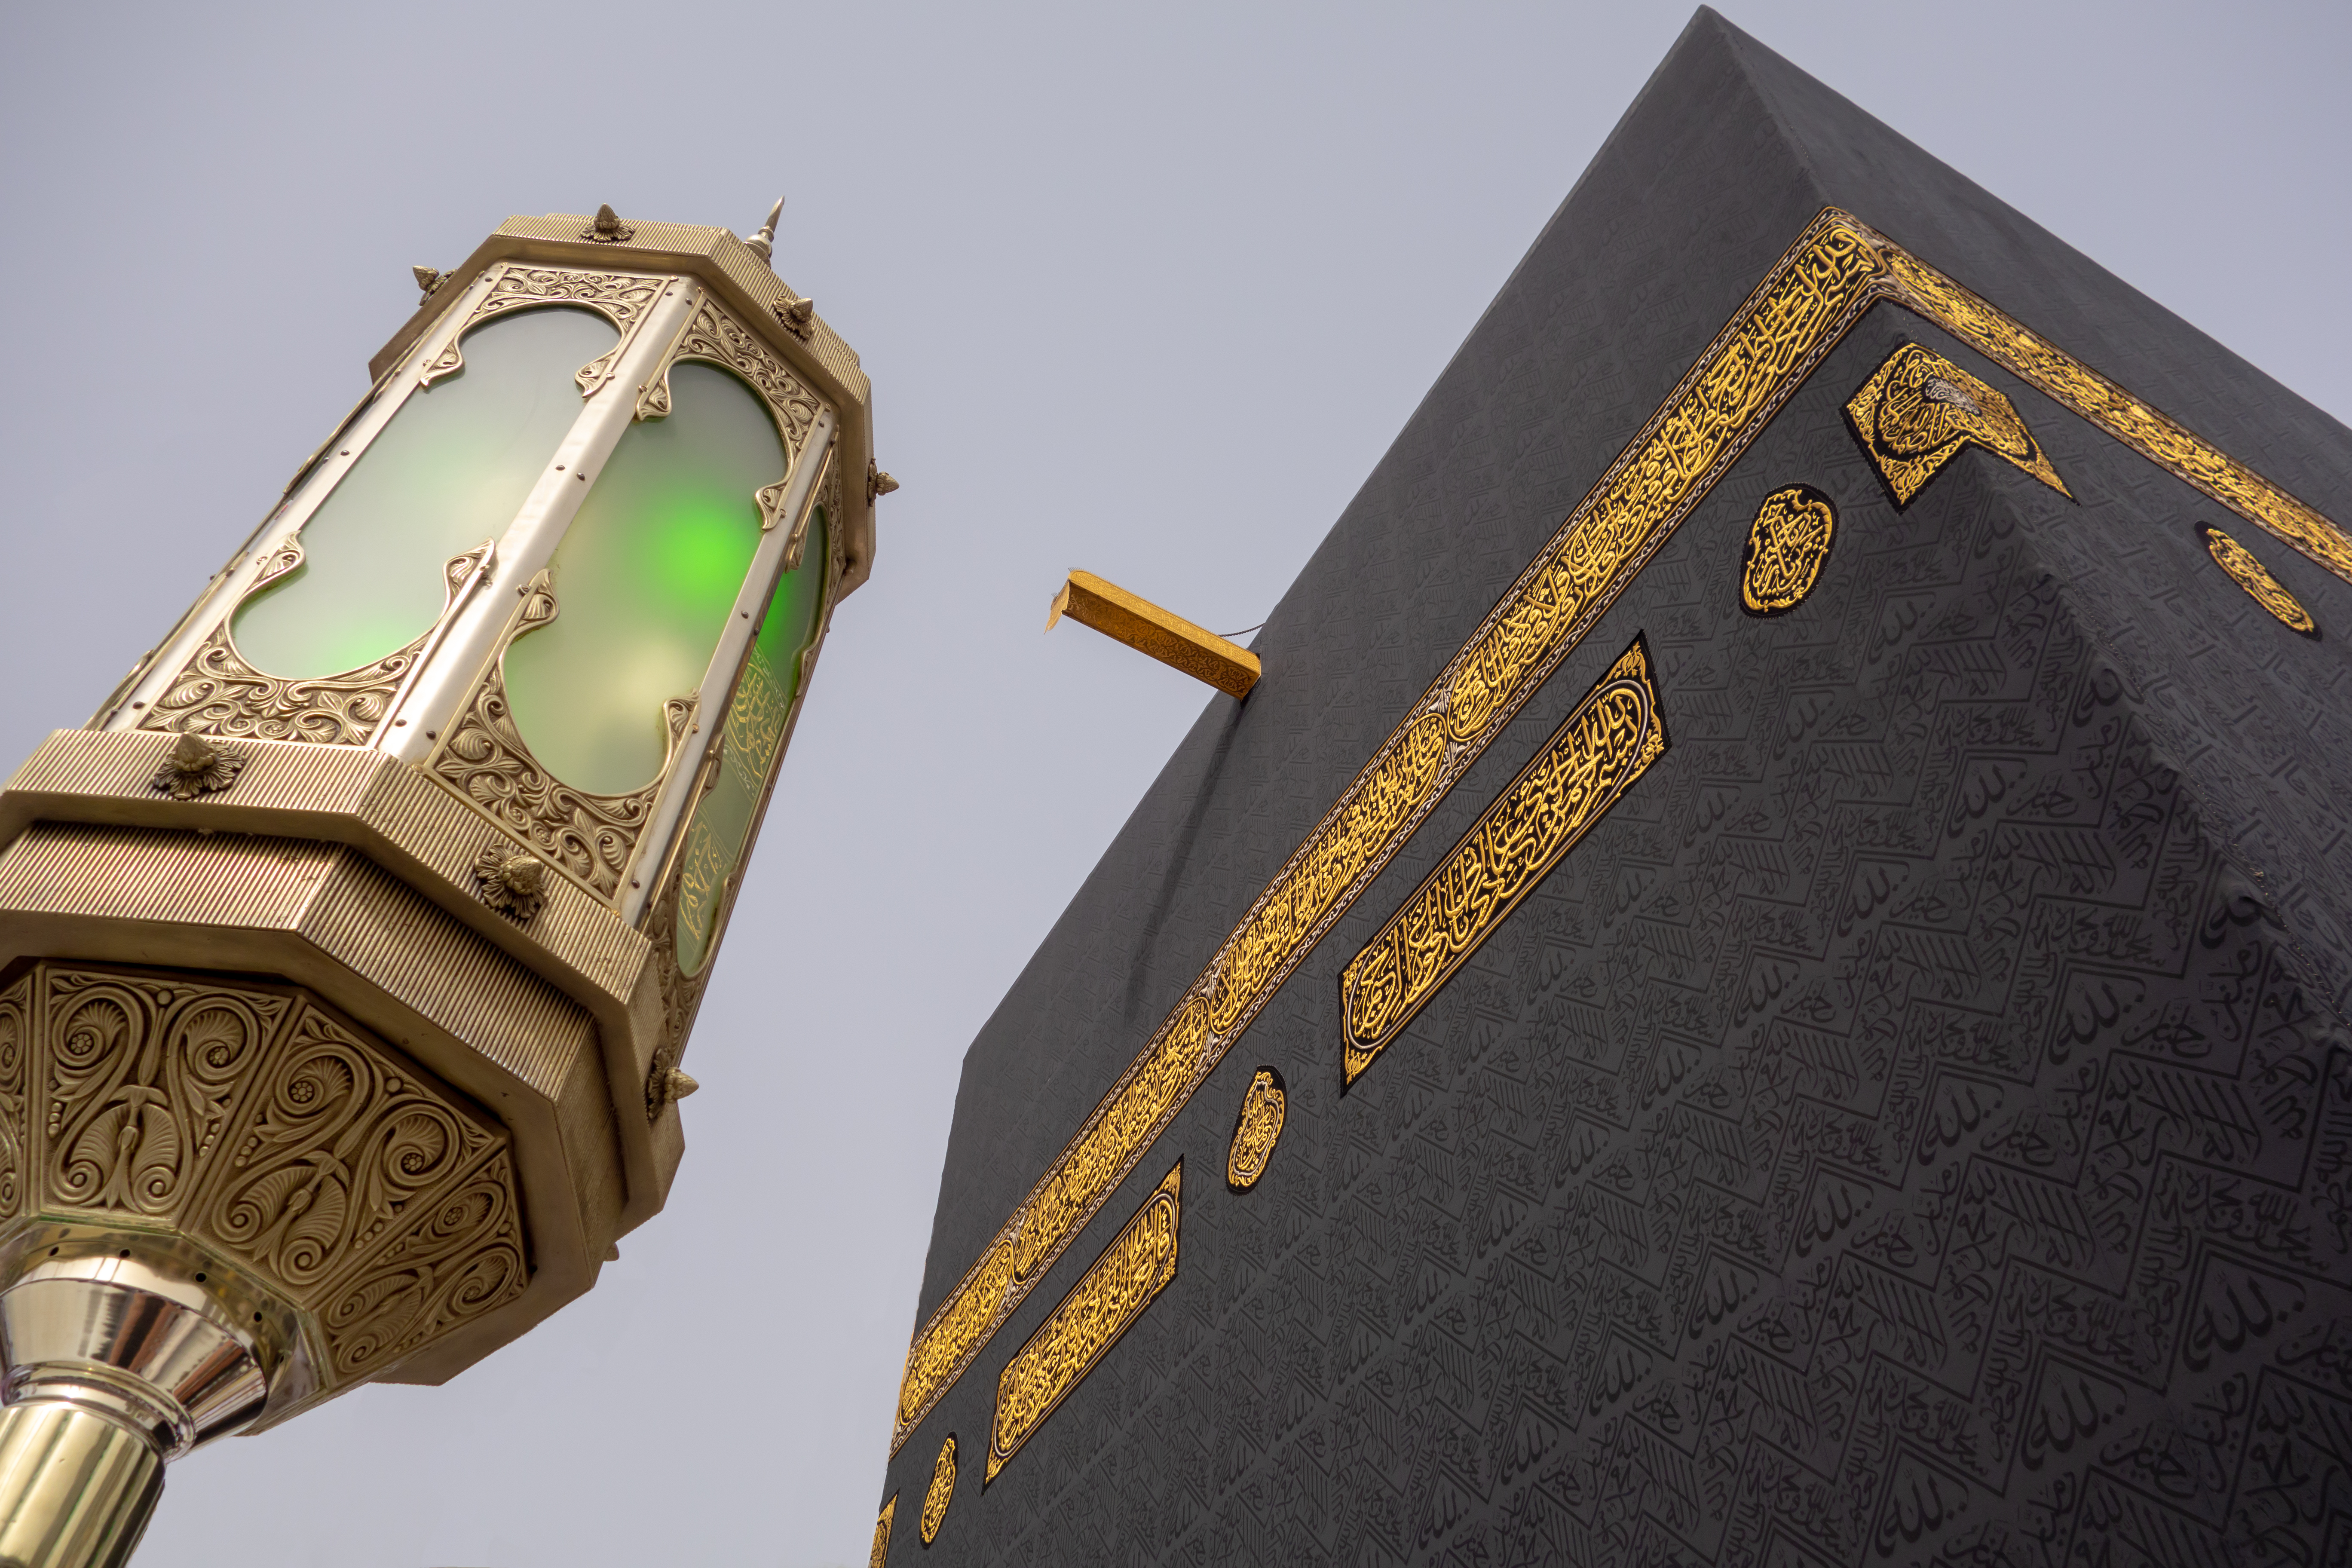 Do Muslims Worship The Black Stone of the Kaaba?